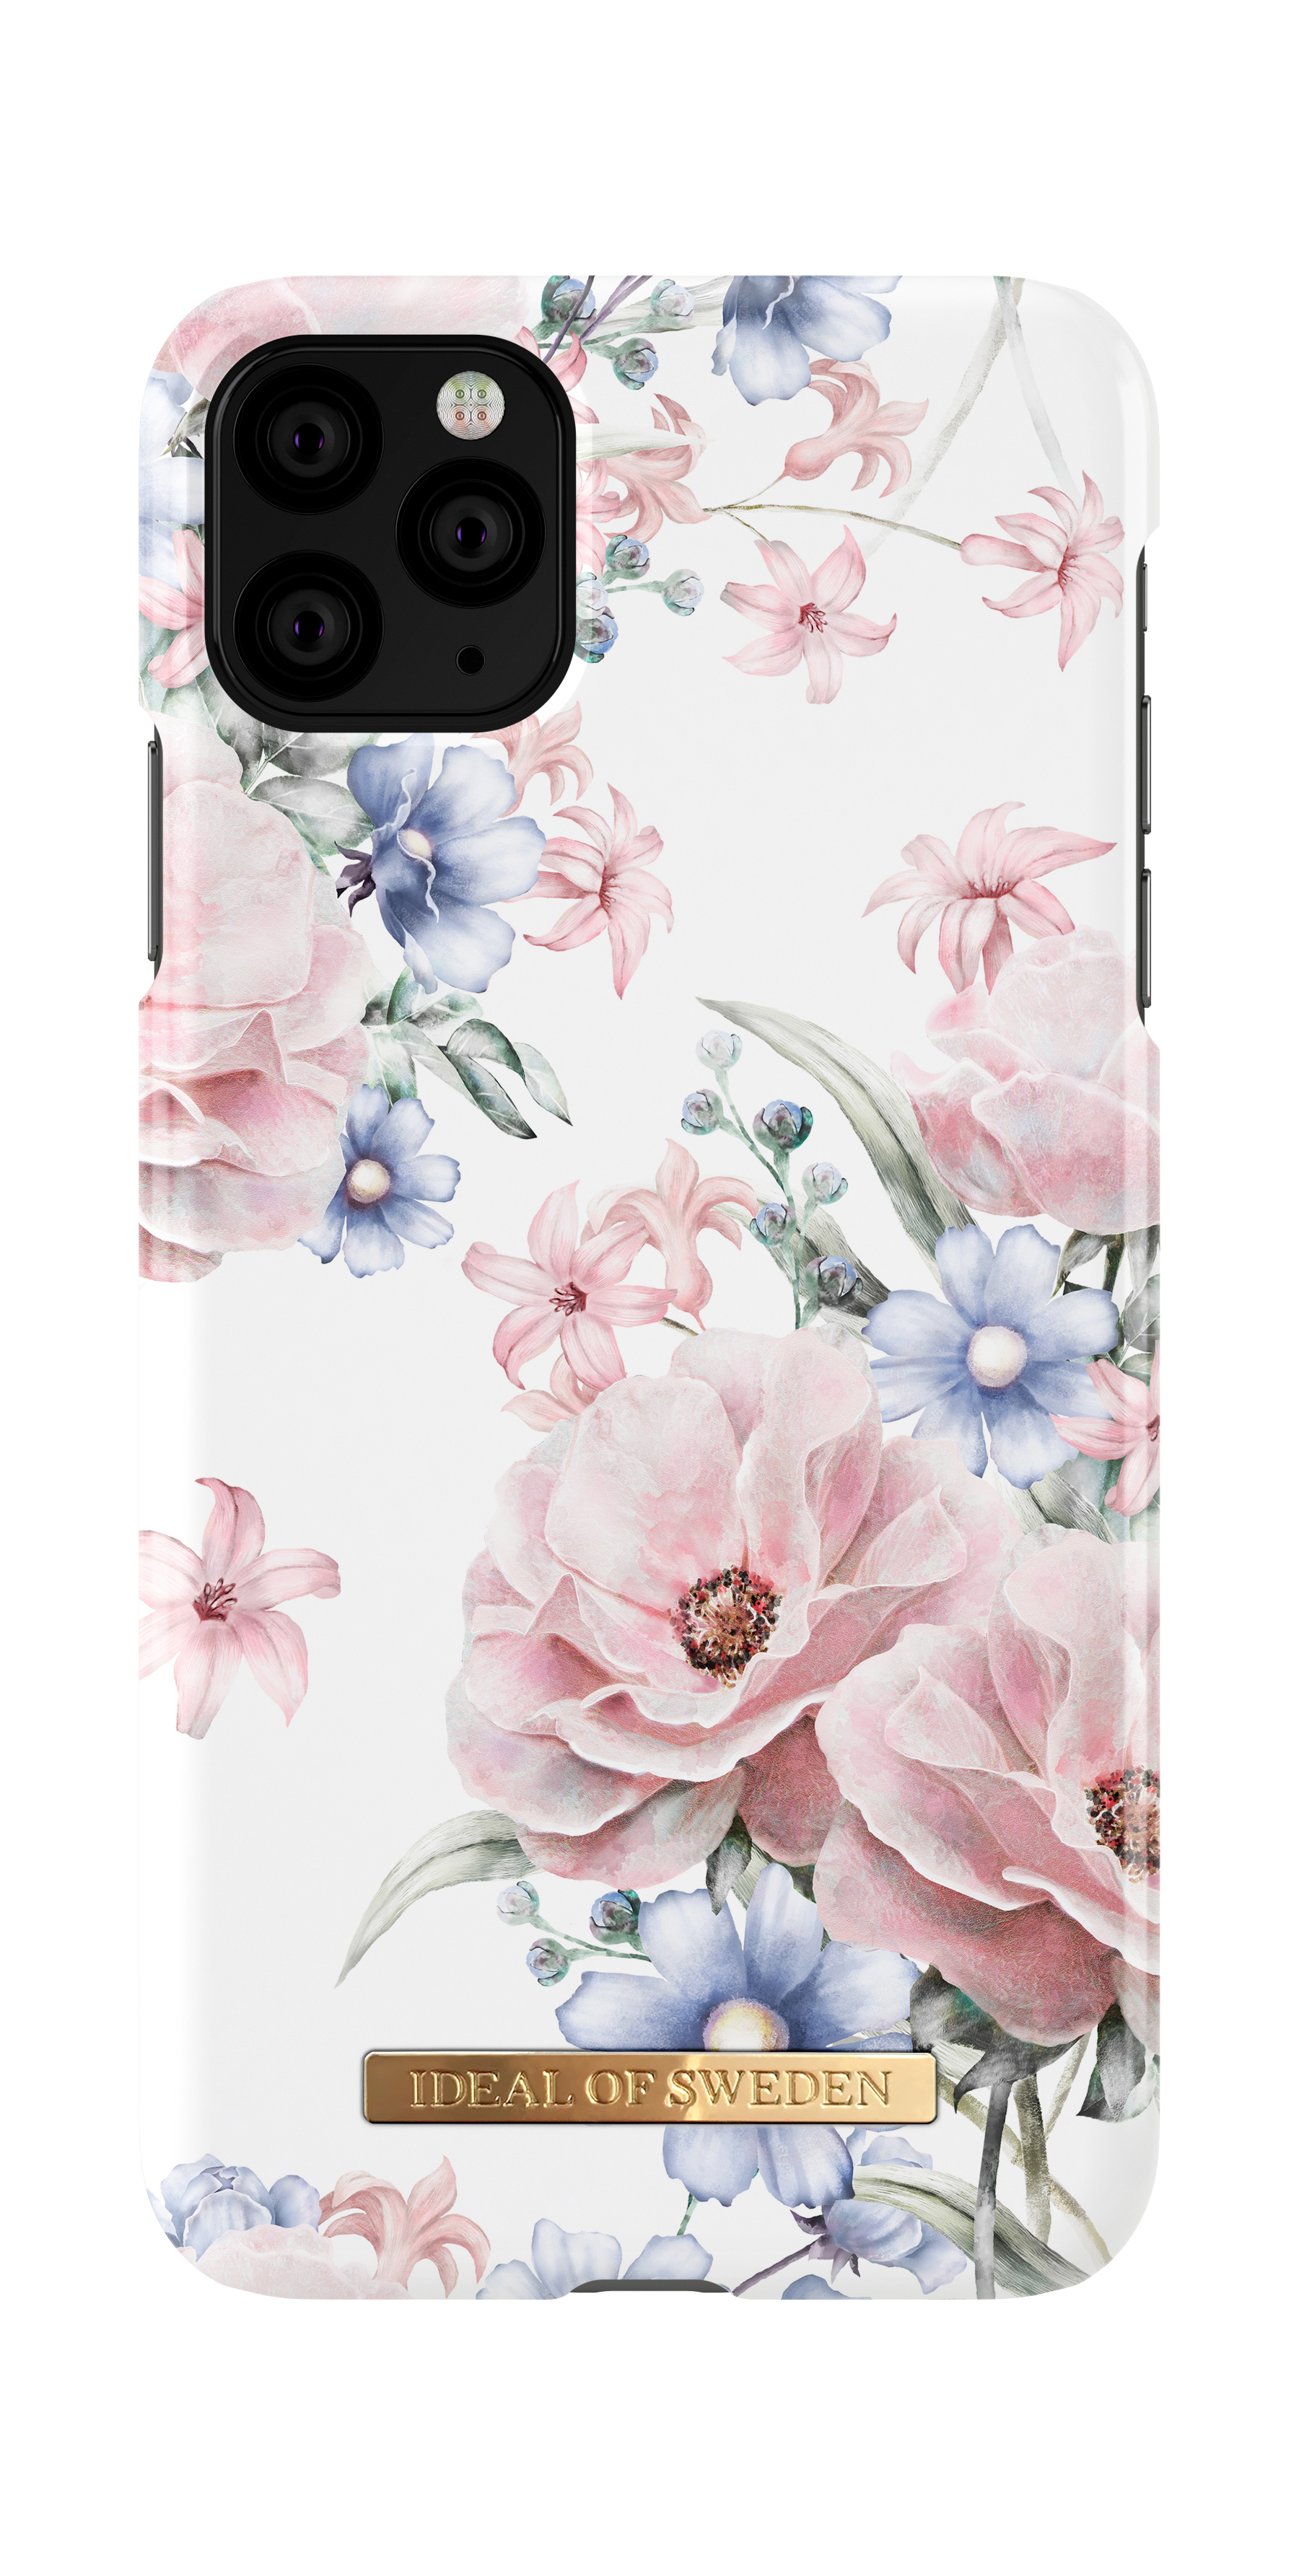 IDEAL OF Backcover, iPhone Case, 11 SWEDEN Max, Pro Fashion Weiß/Rosa Apple